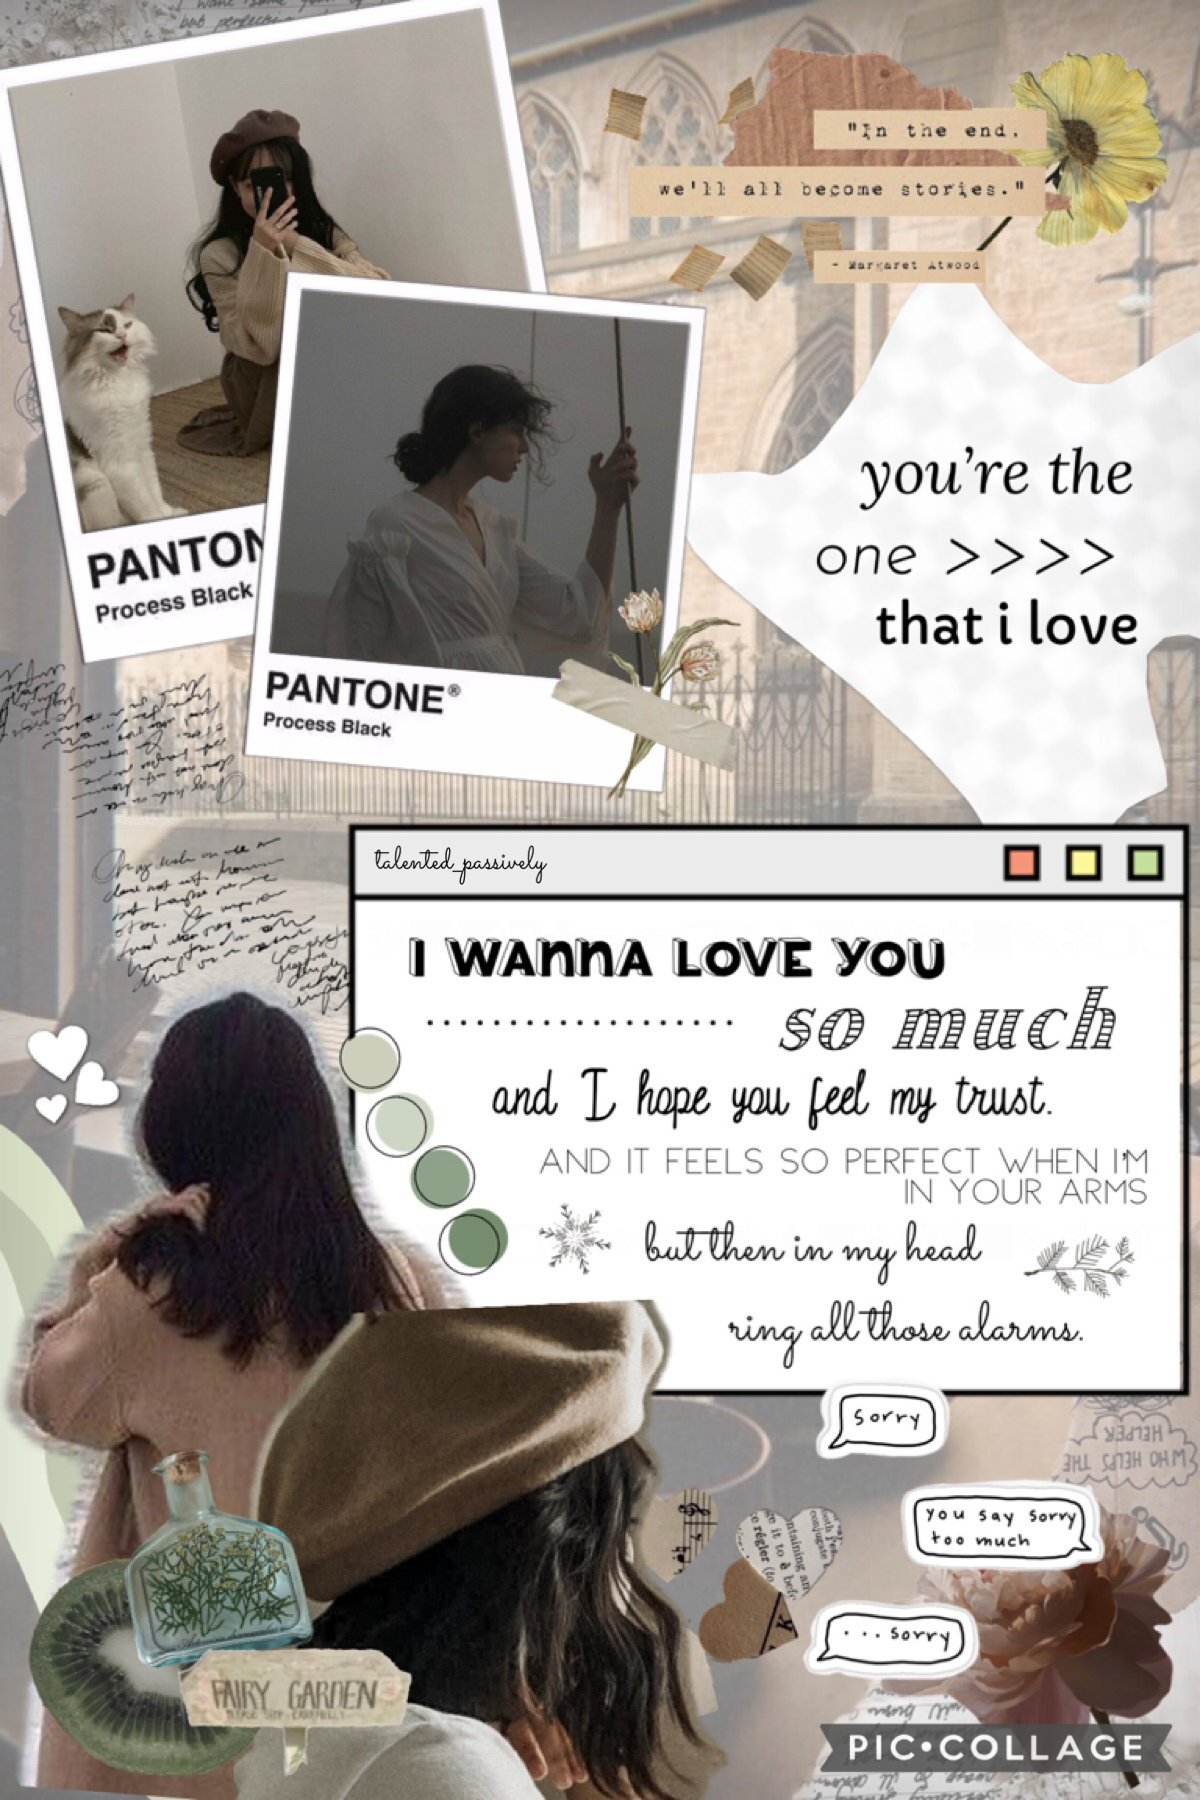 📗 30/3/23 (tap) 📗
heyyy how’s the weather over there? the words in this collage are mine, inspired by my own love experiences 😔 qotd: current mood?